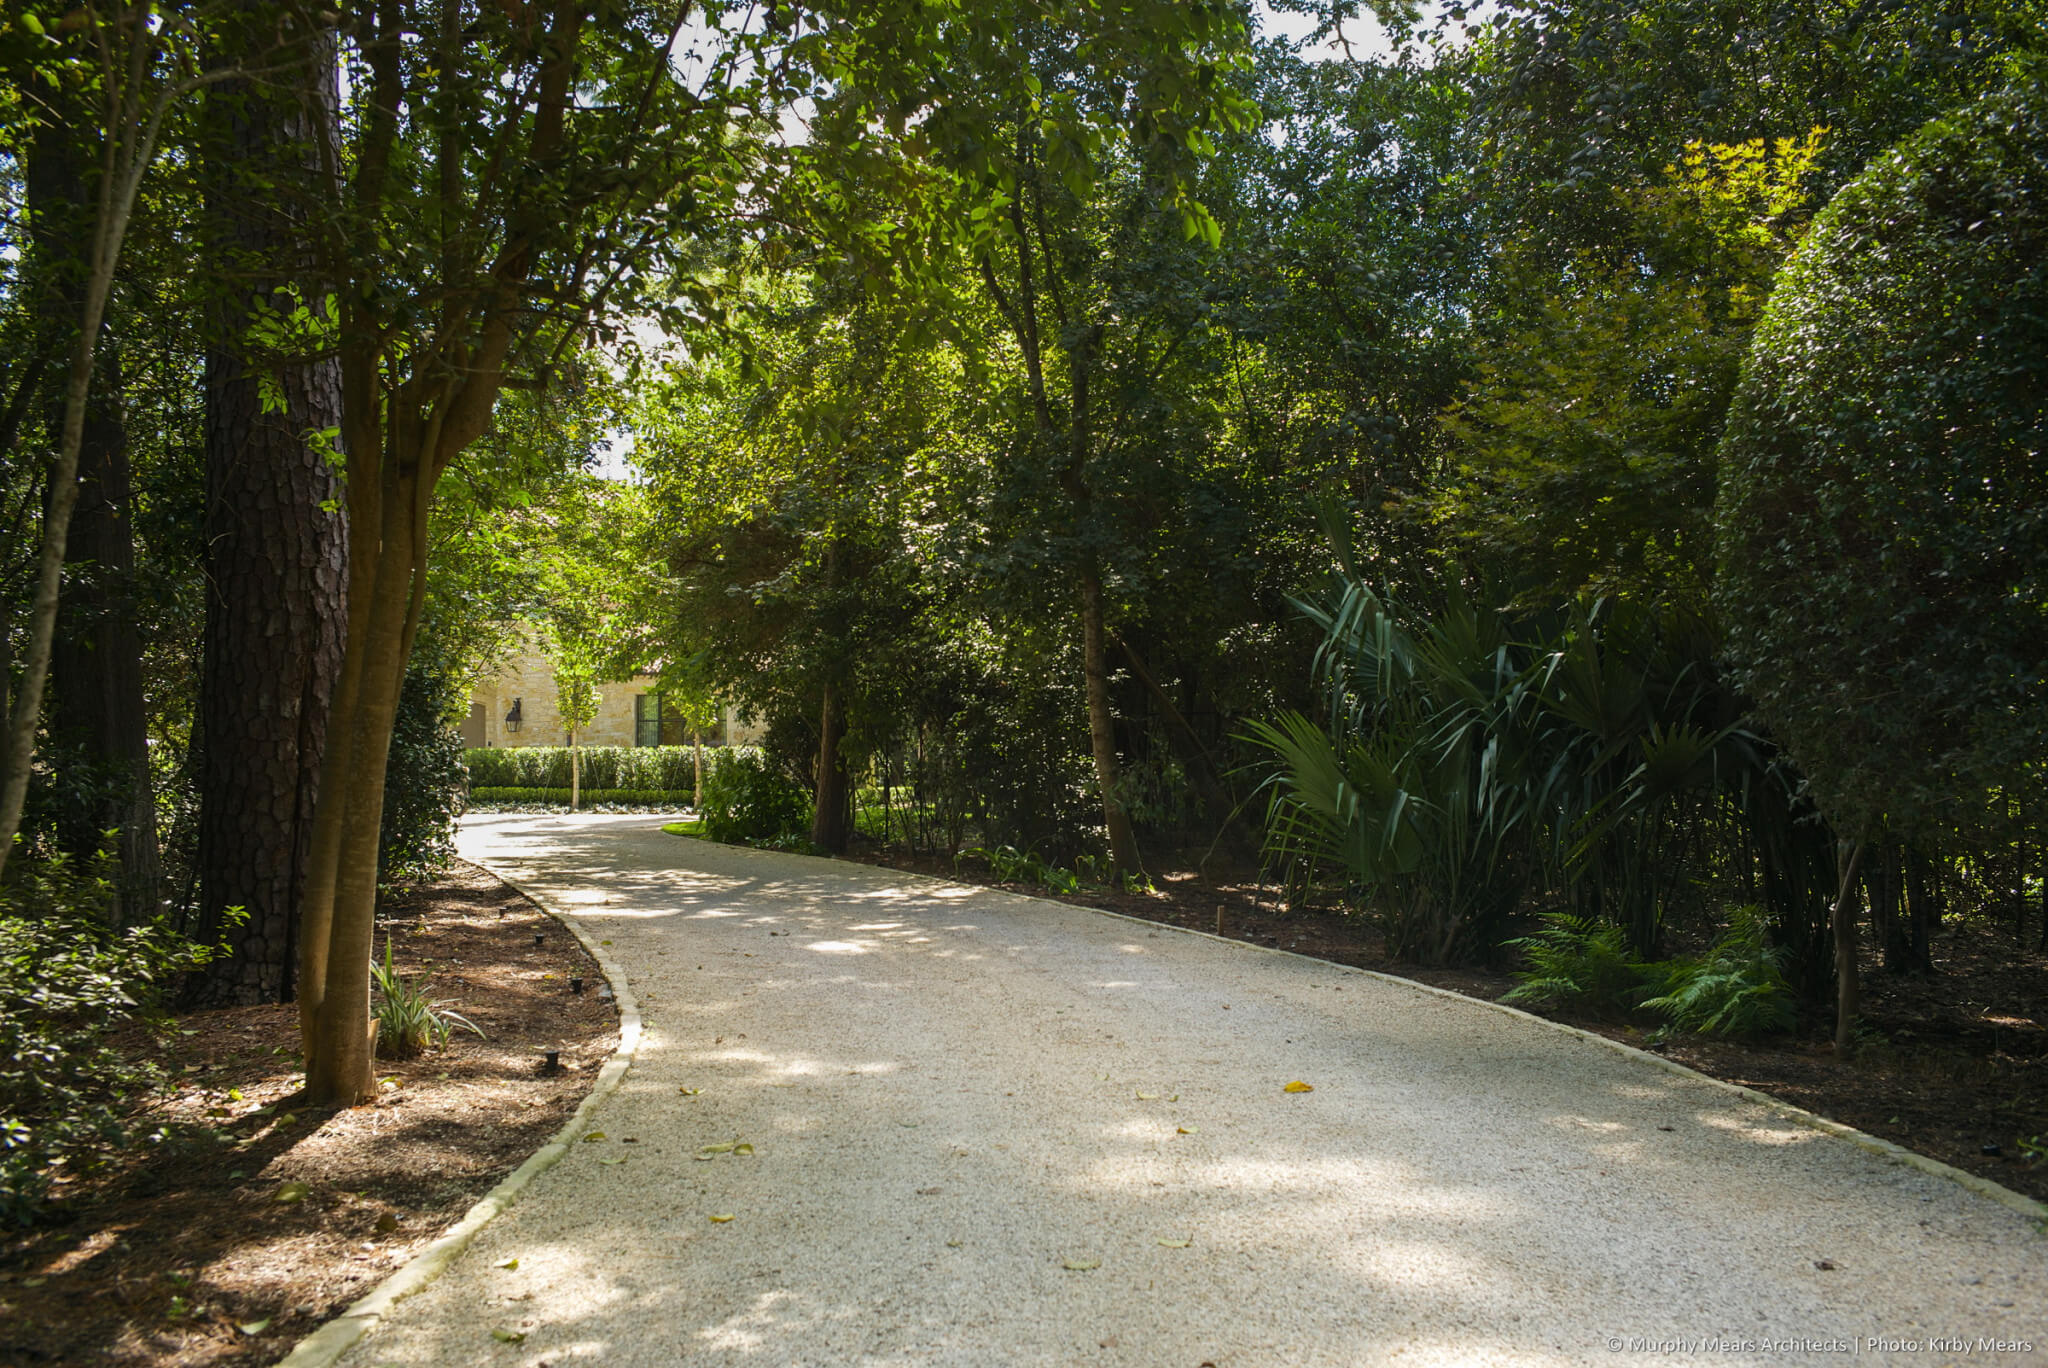 Gravel driveway winding through the wooded site.